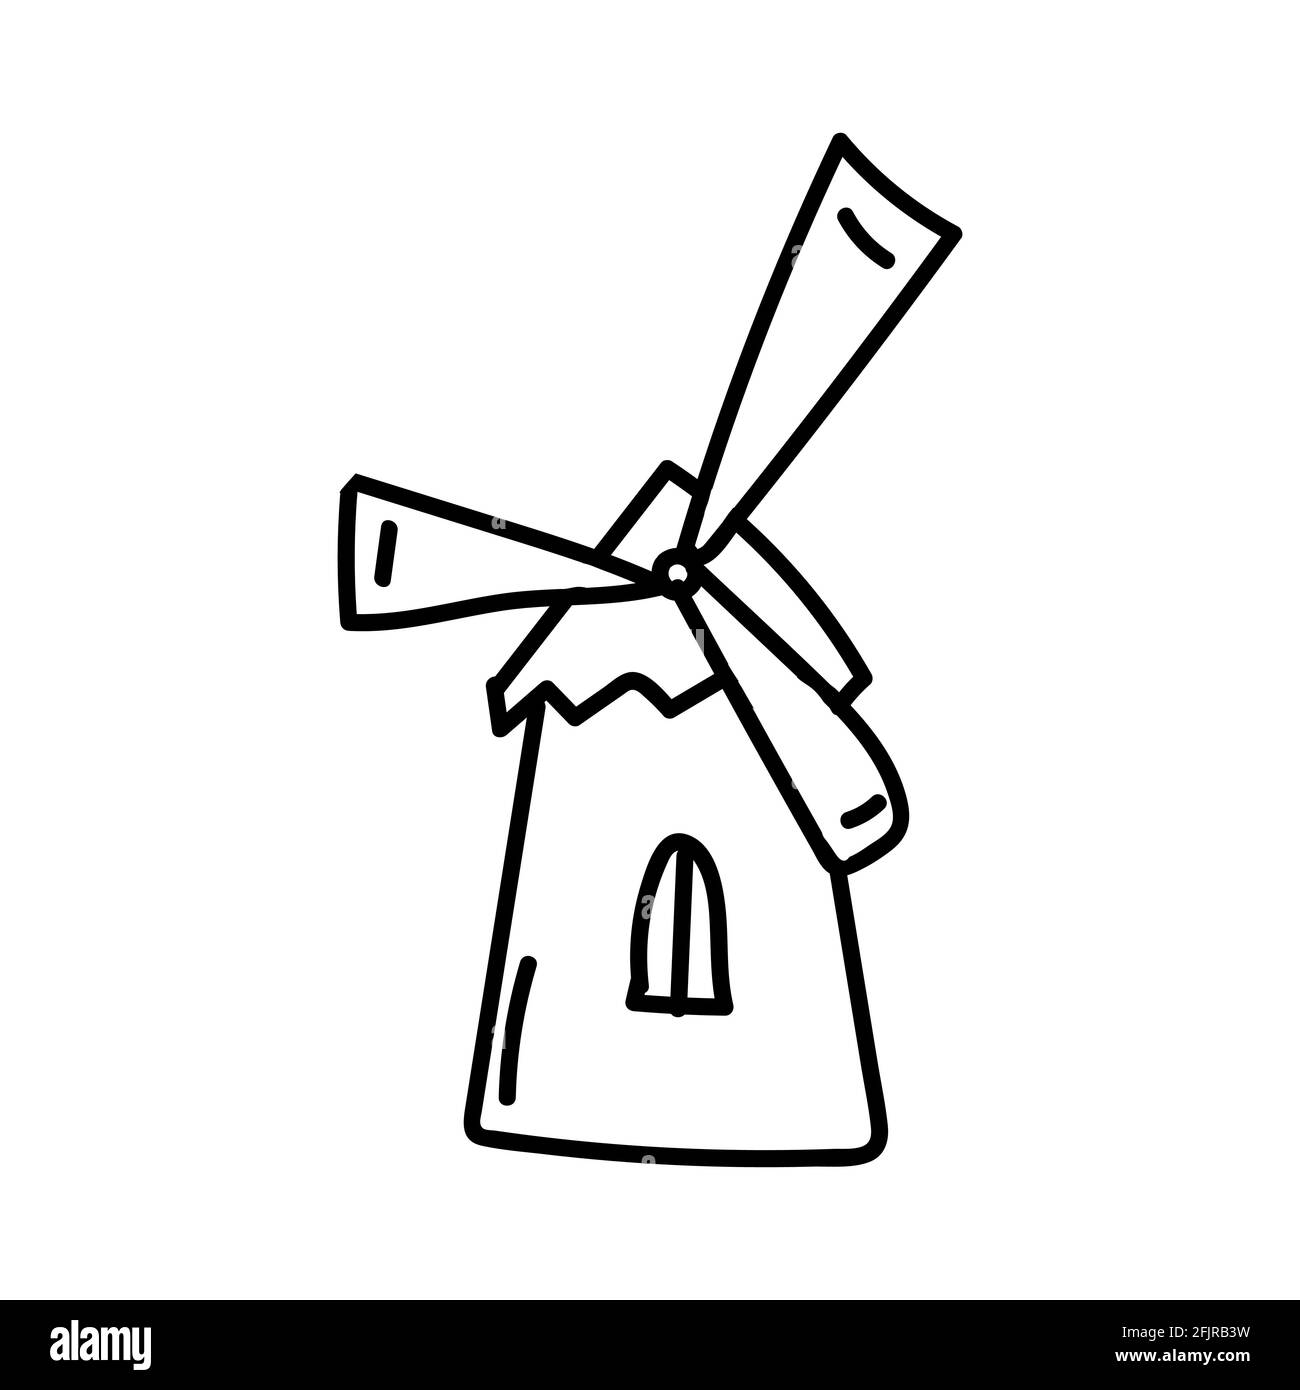 windmill. Hand drawn doodle vector illustration isolated on whithe background. Simple drawings with black color. Stock Vector